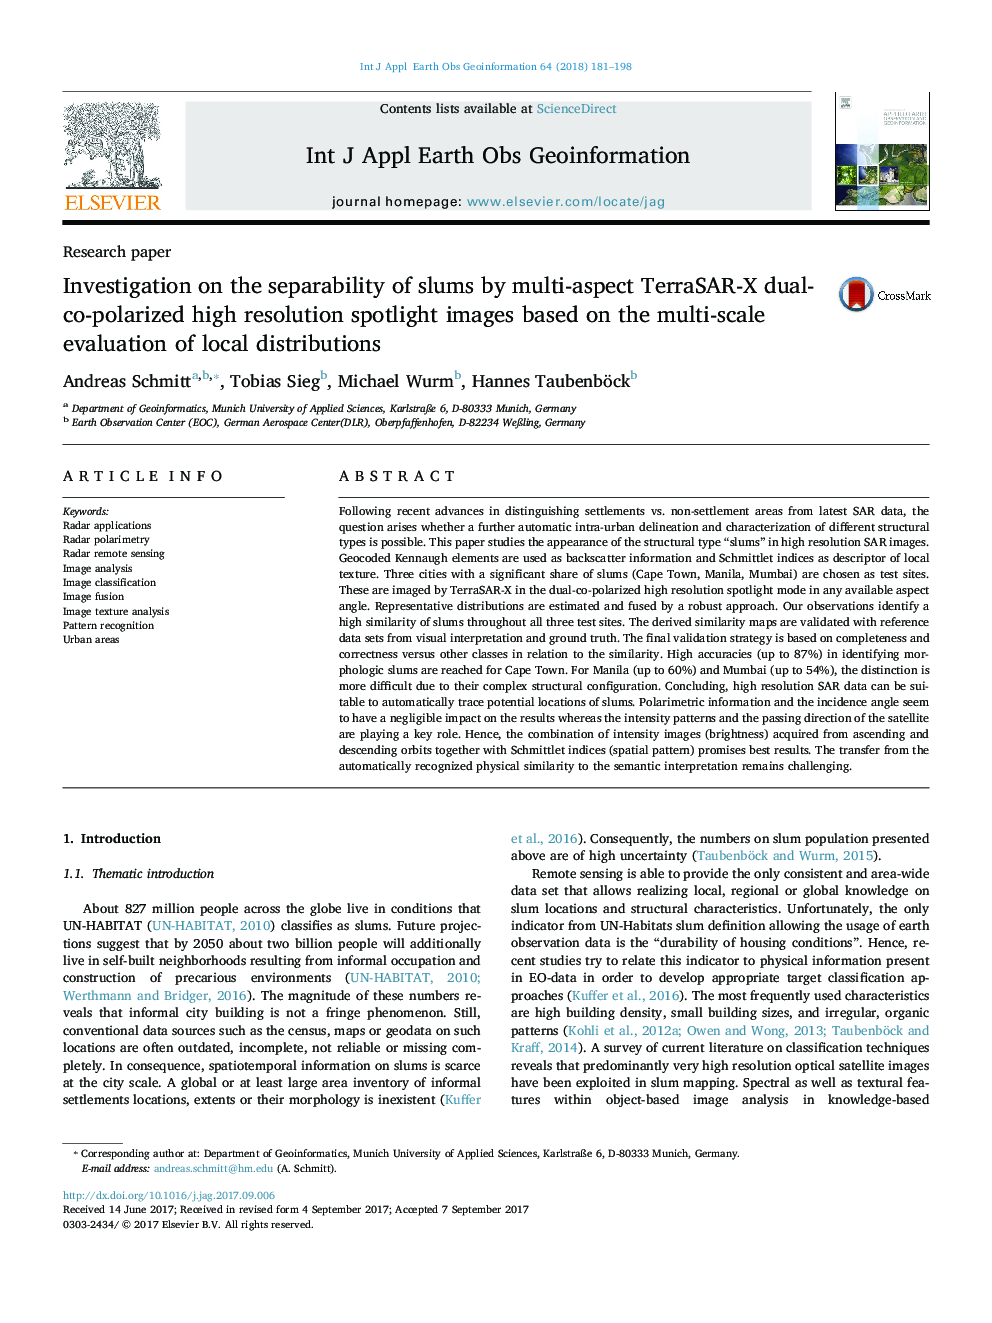 Investigation on the separability of slums by multi-aspect TerraSAR-X dual-co-polarized high resolution spotlight images based on the multi-scale evaluation of local distributions